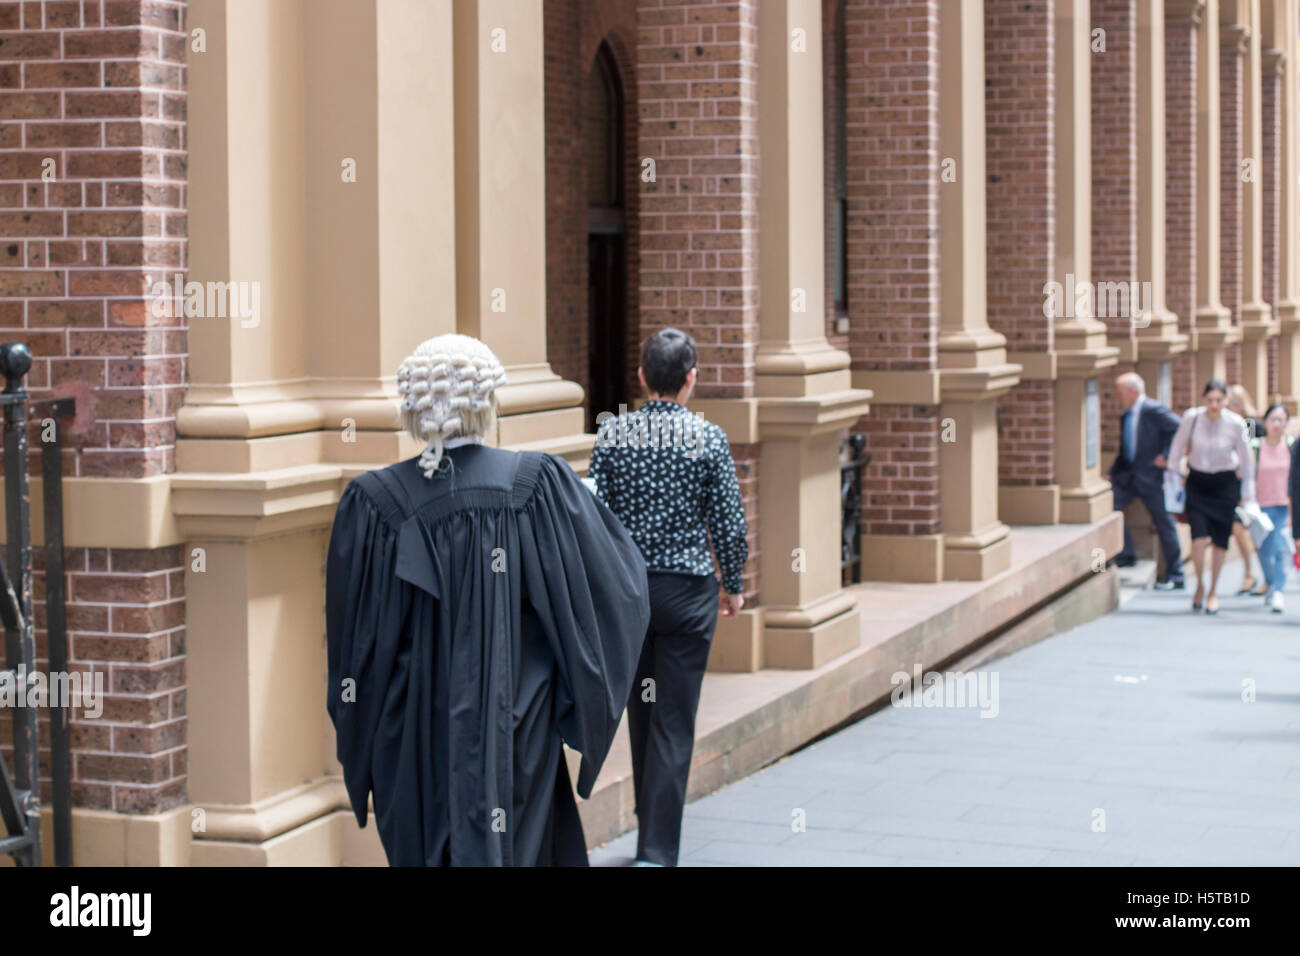 Female barrister entering Supreme Court in phillip street, Sydney, new south wales,Australia Stock Photo